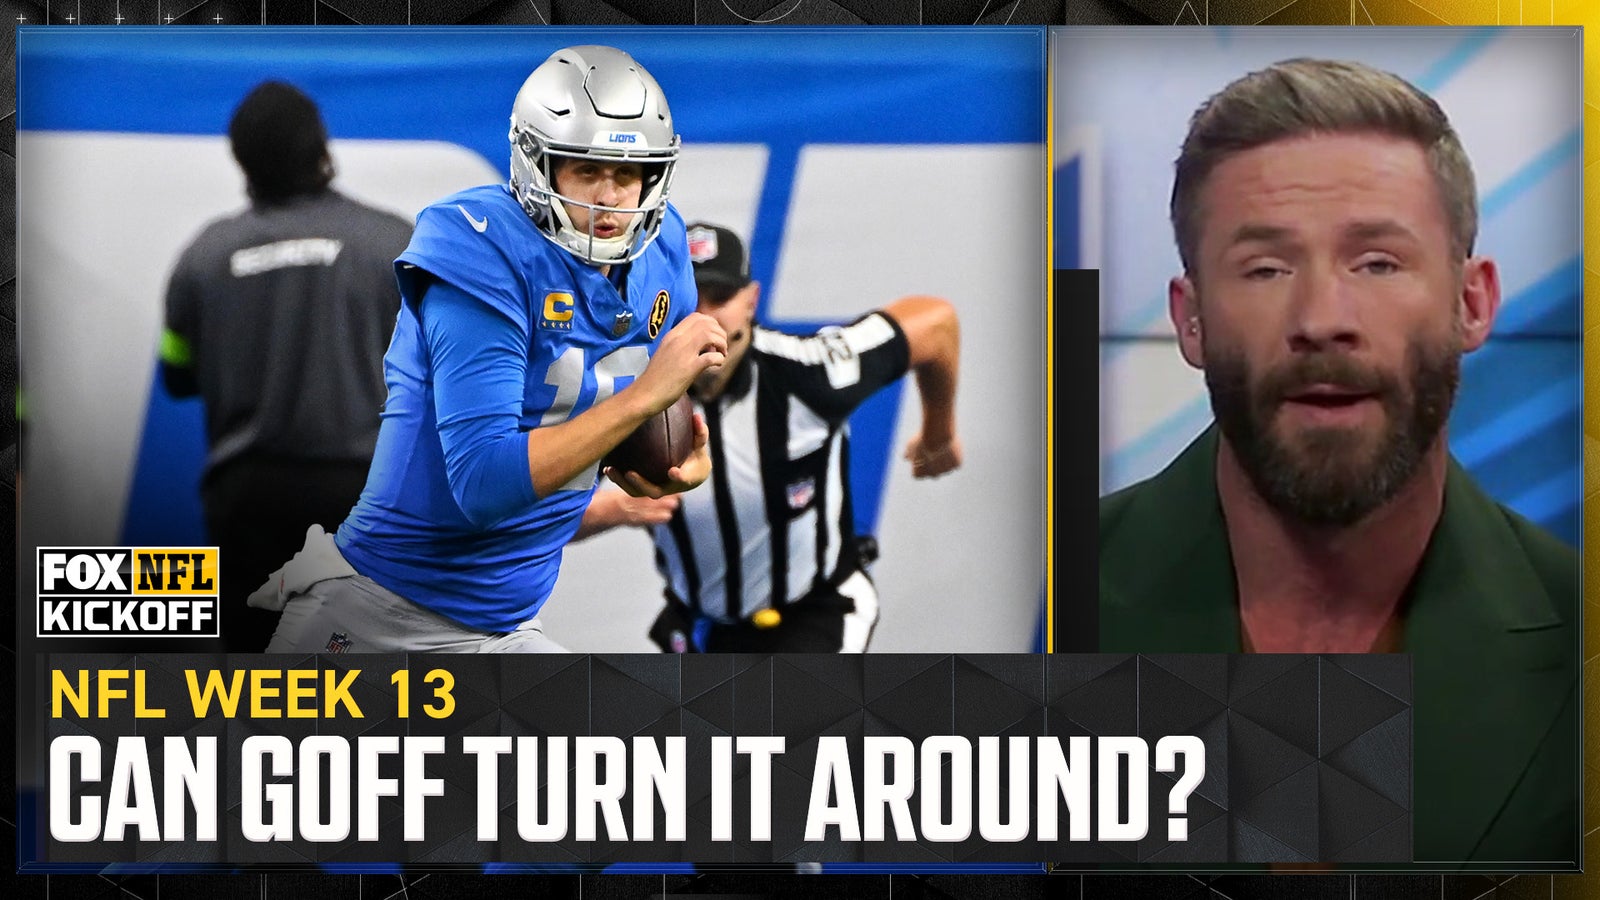 Can Jared Goff turn things around for the Lions?